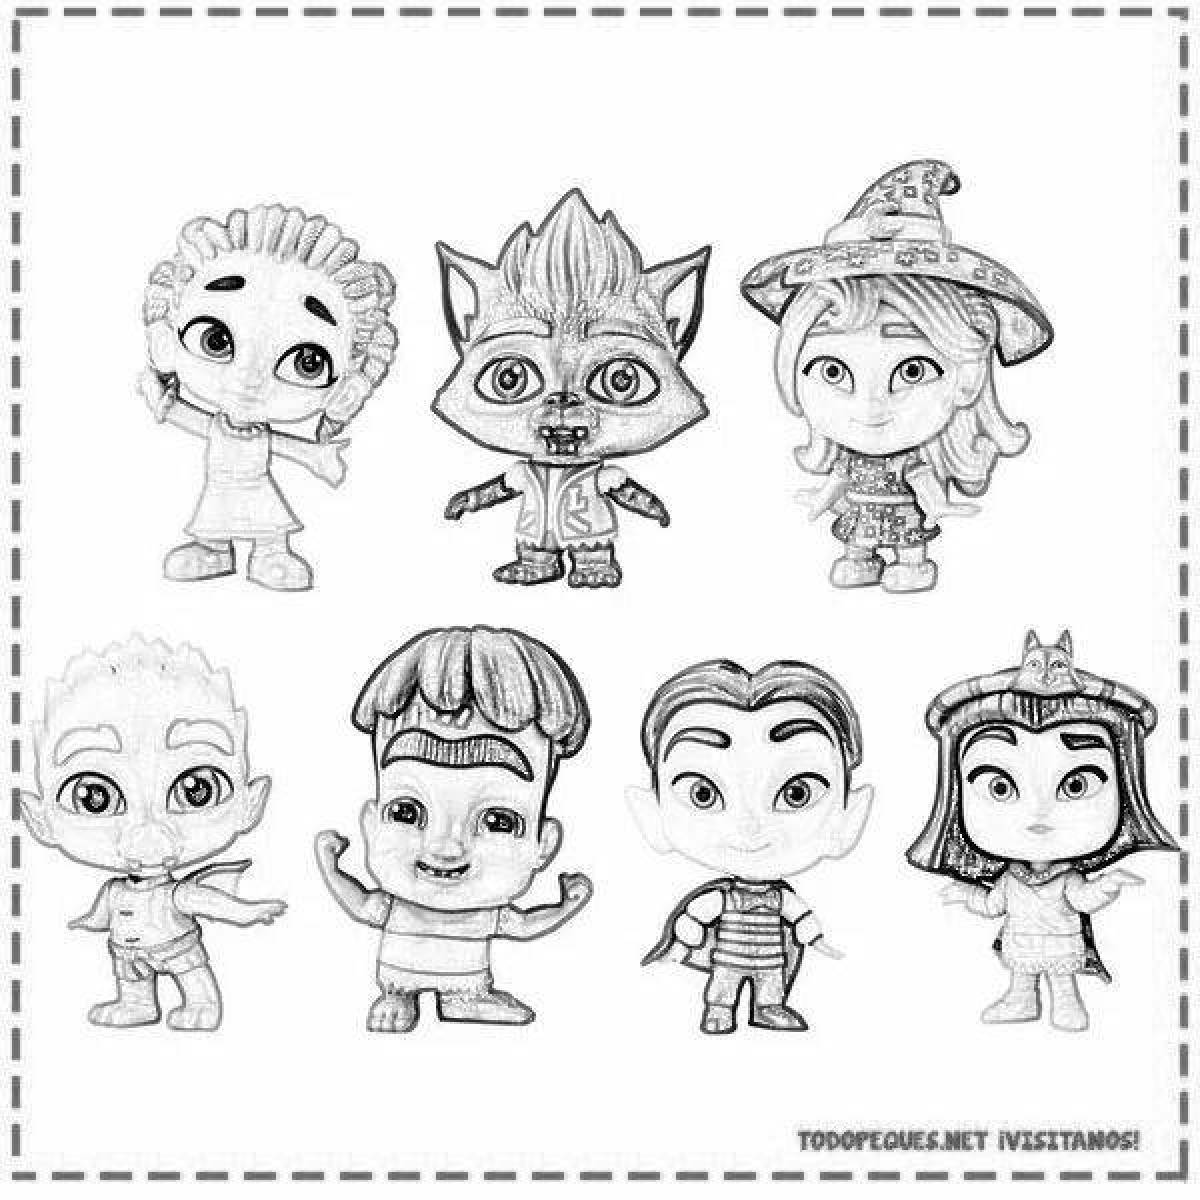 Charming super monsters coloring book